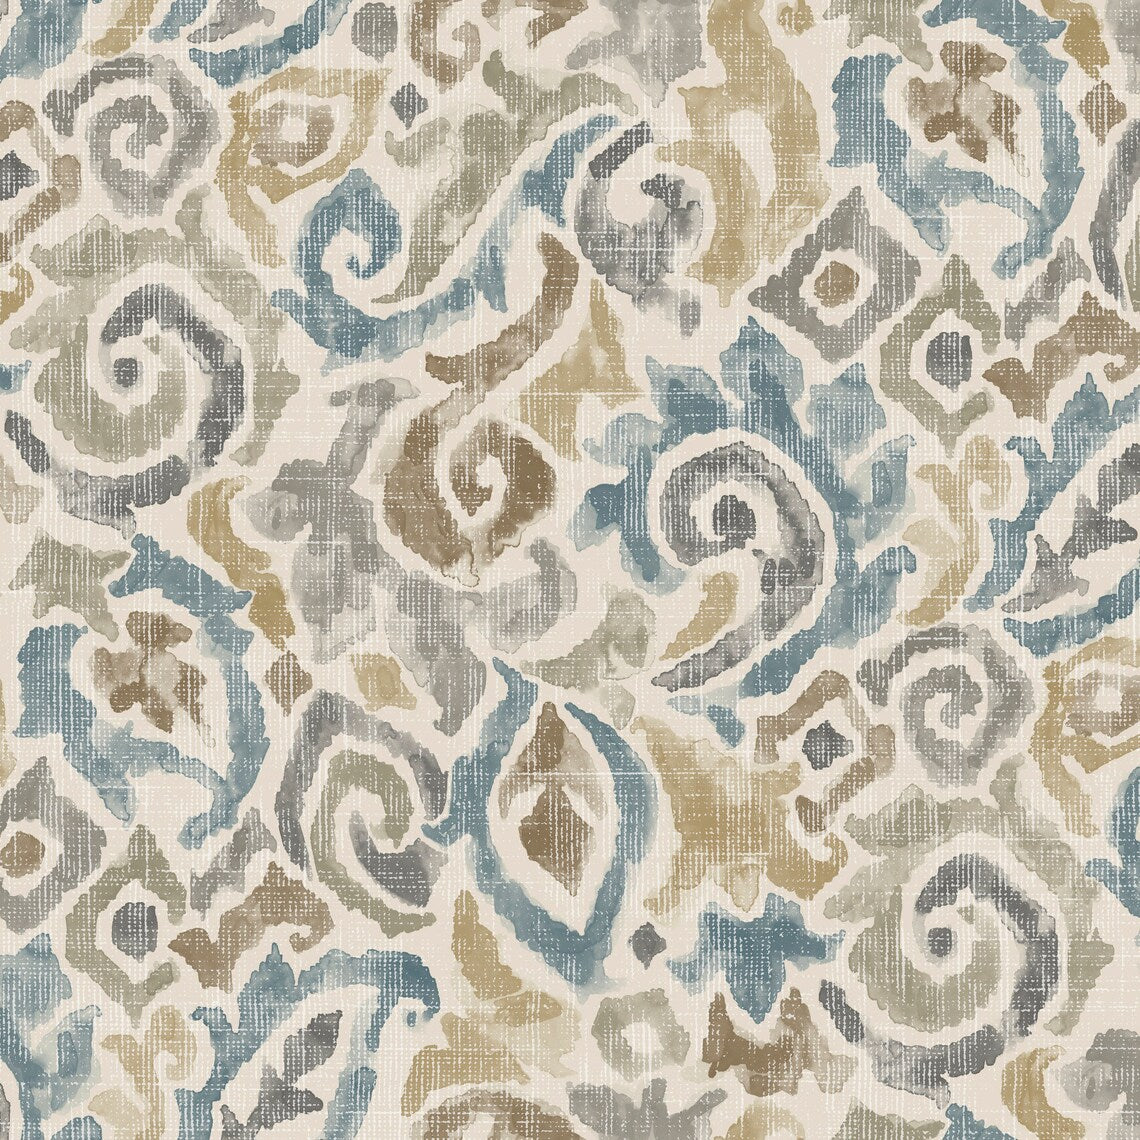 pillow sham in Jester Harbor Blue Paisley Watercolor